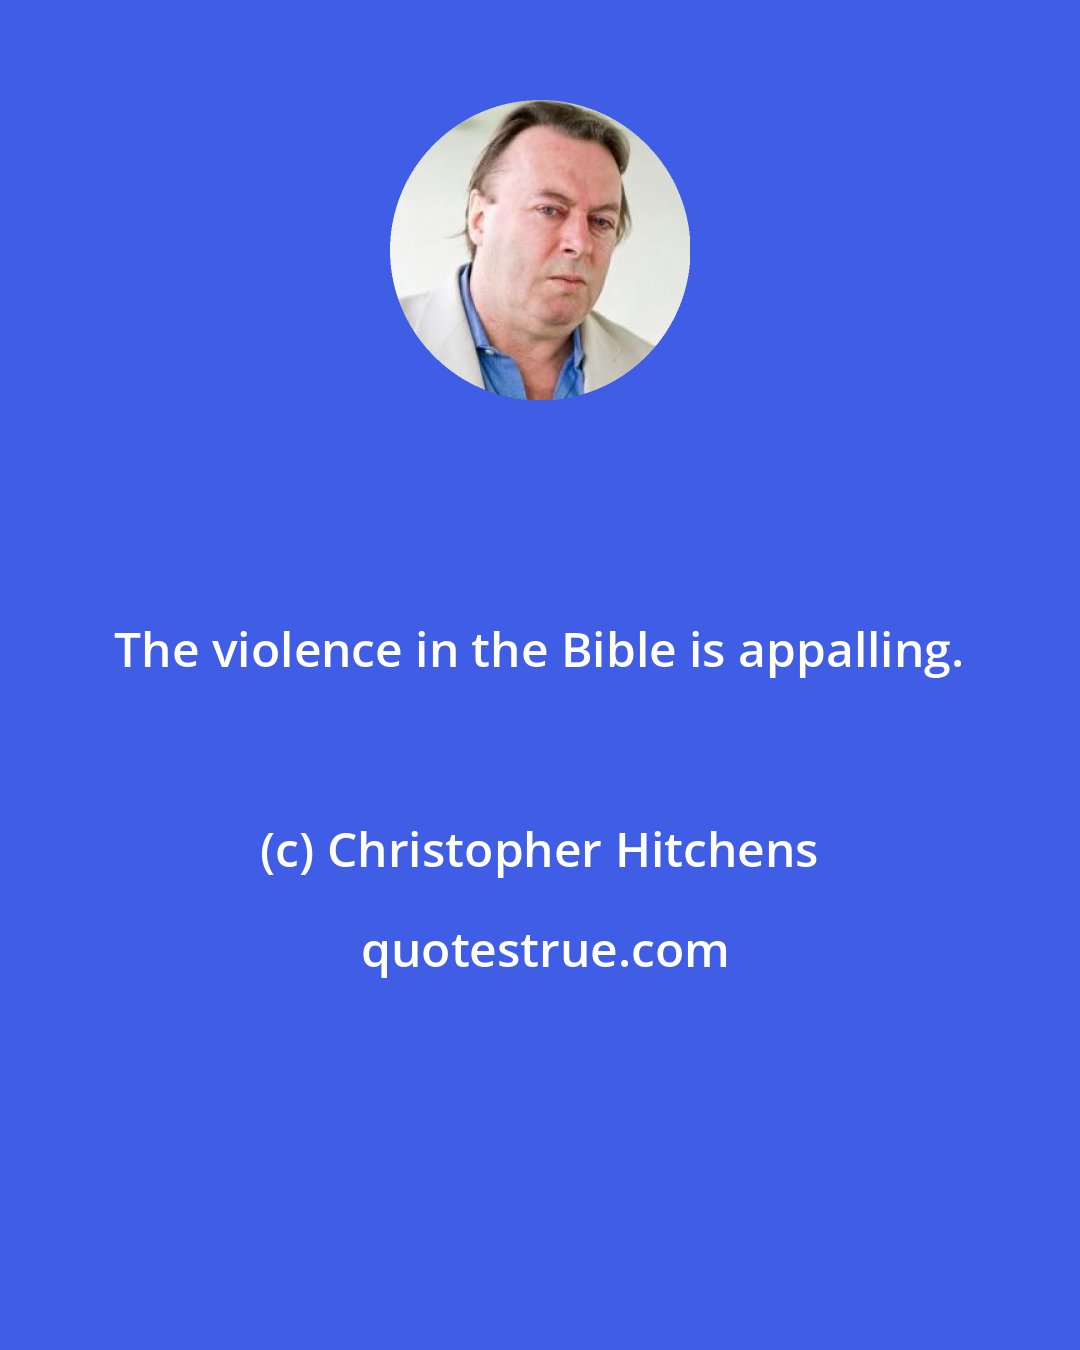 Christopher Hitchens: The violence in the Bible is appalling.